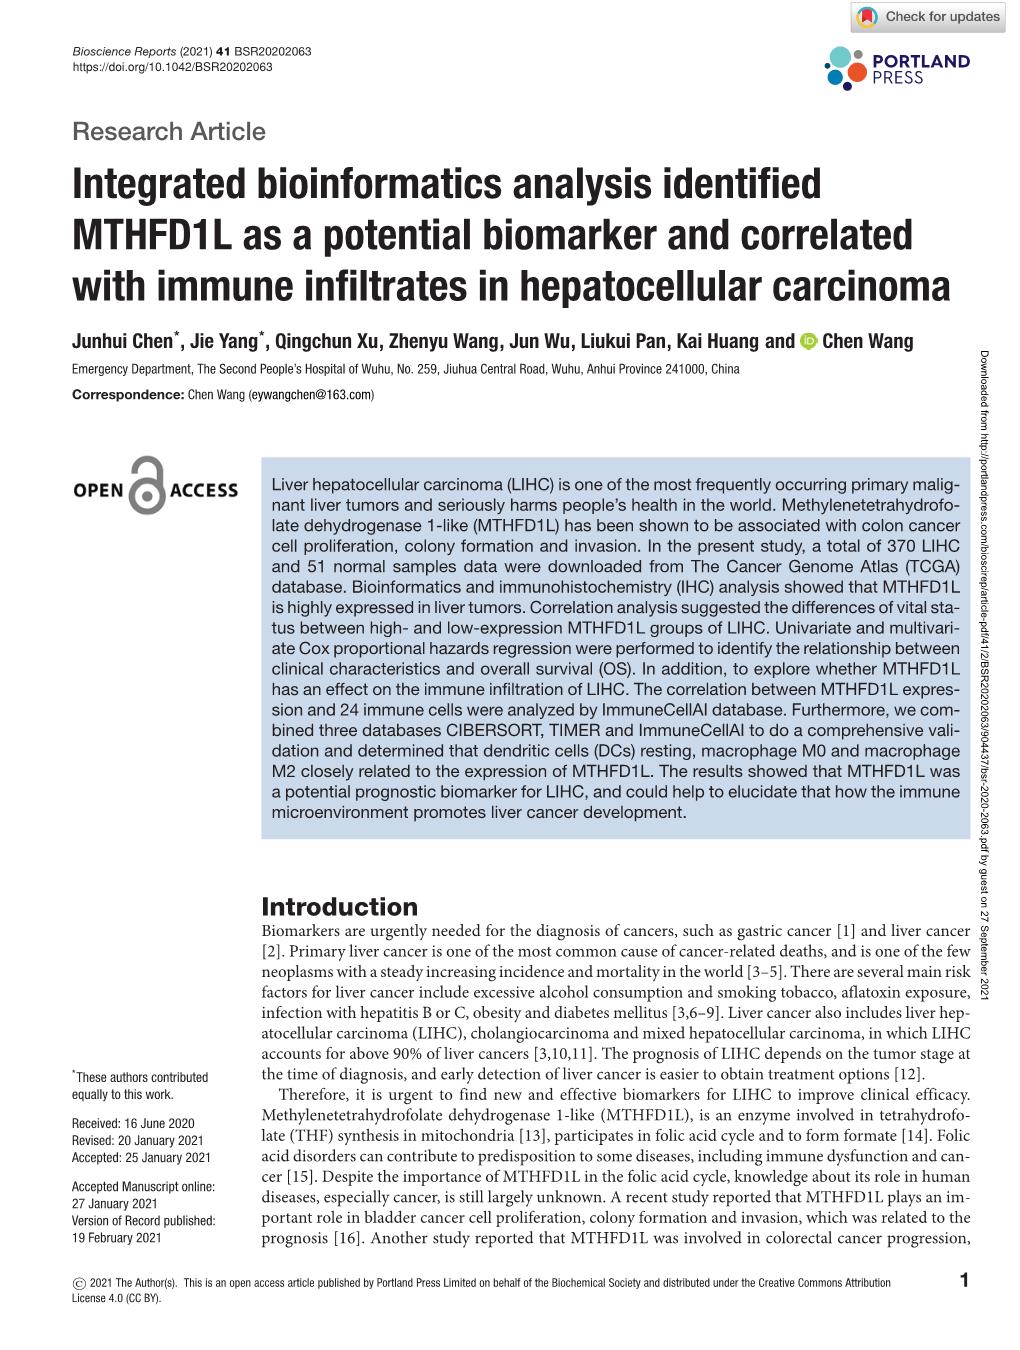 Integrated Bioinformatics Analysis Identified MTHFD1L As a Potential